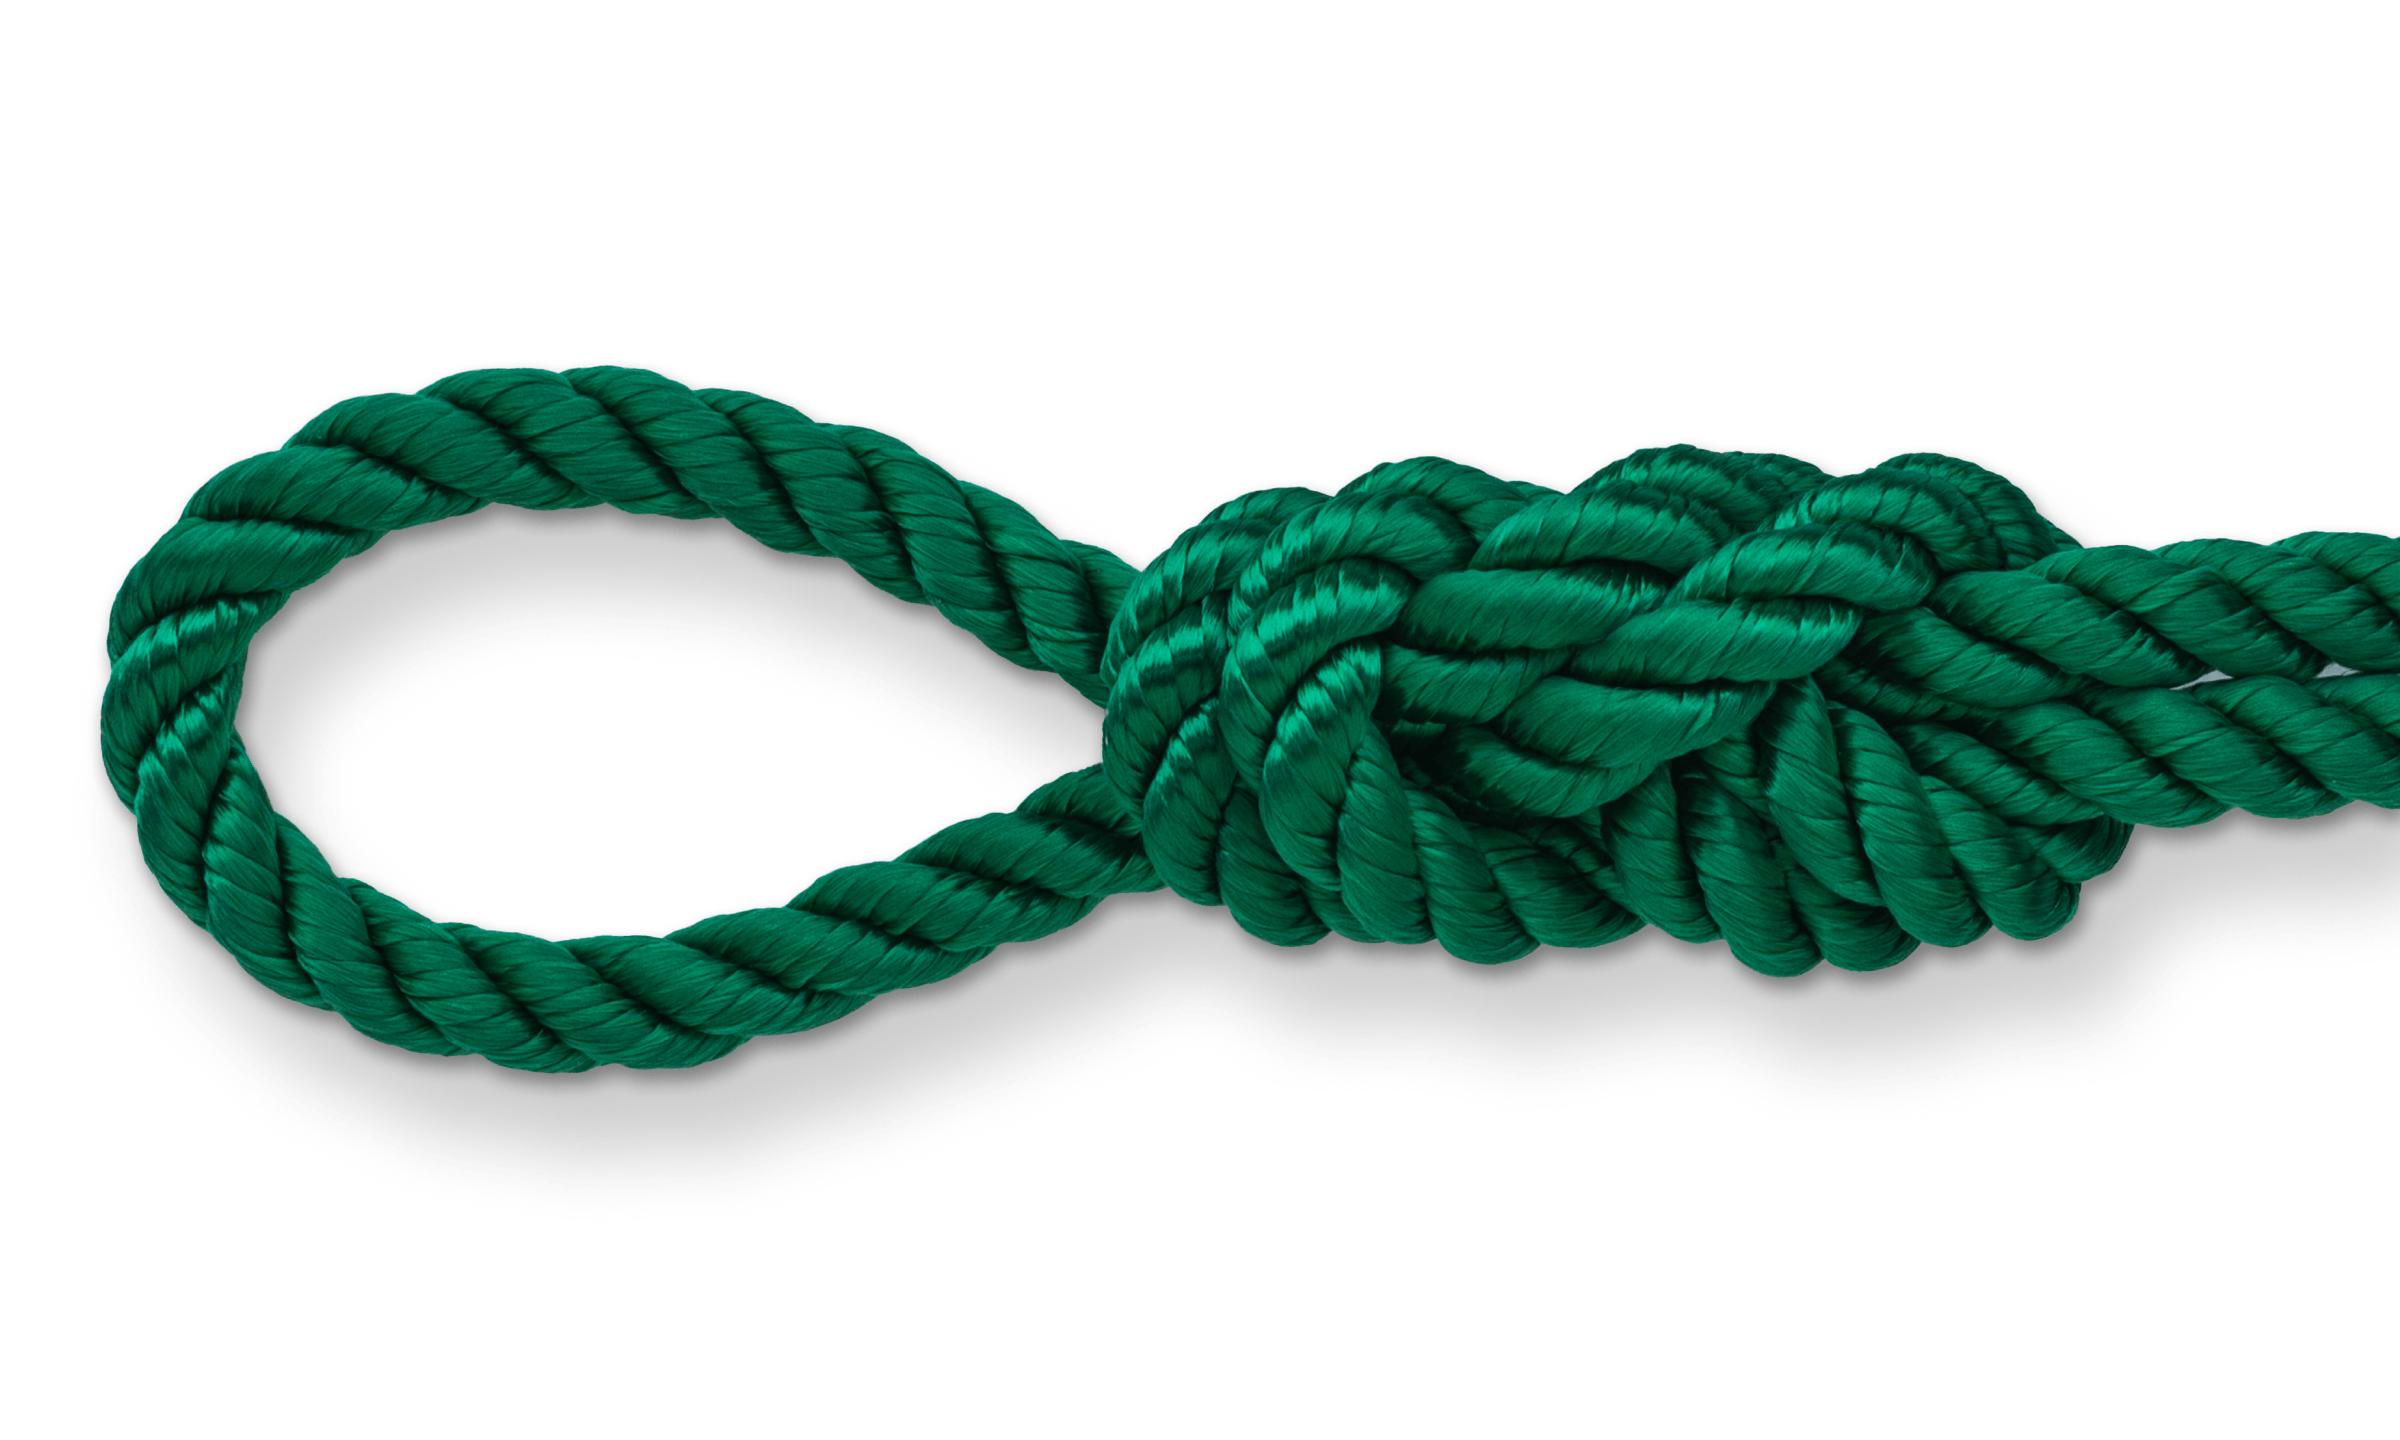 3-strand twisted green rope